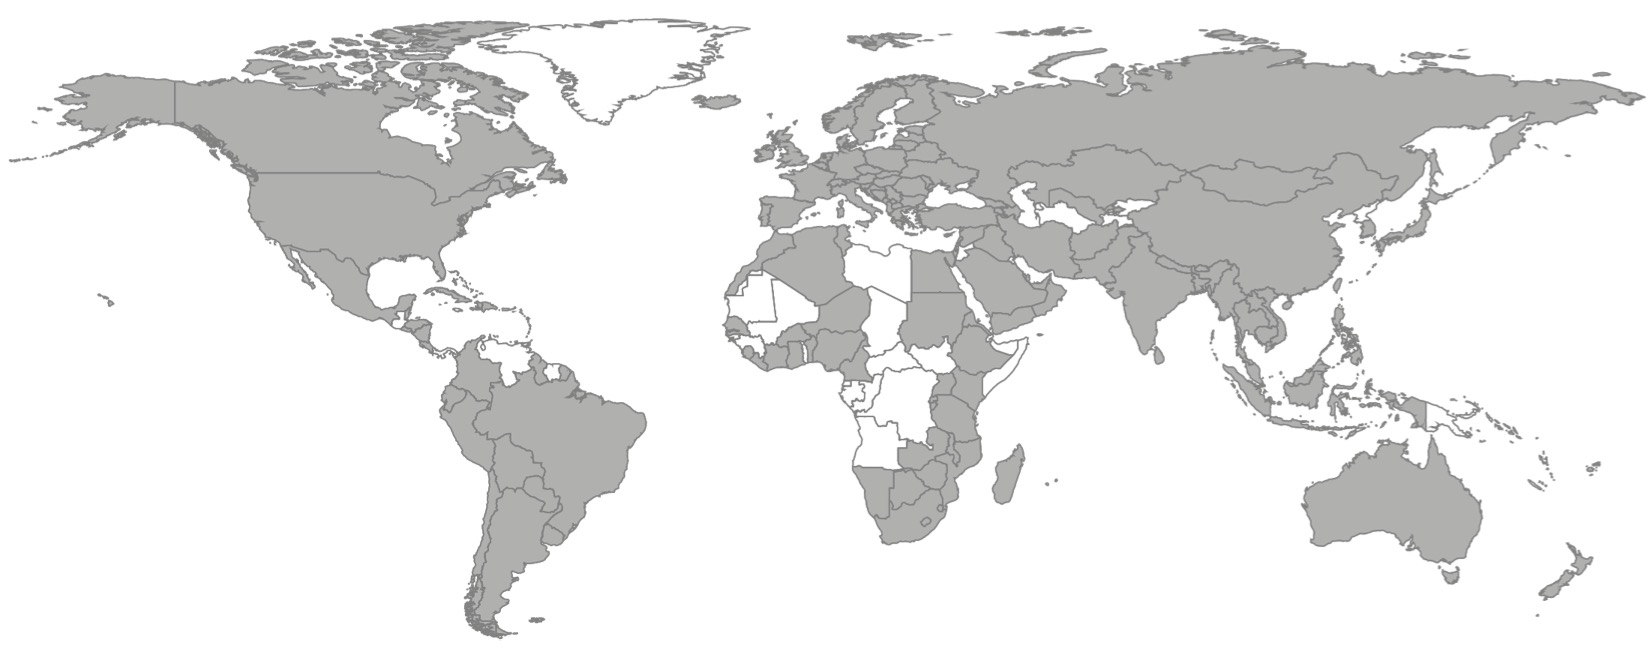 Countries (grey, n = 162) with registered downloads of the AMR package for R between March 2018 and April 2021. Sources: cran.rstudio.org and cloud.r-project.org.